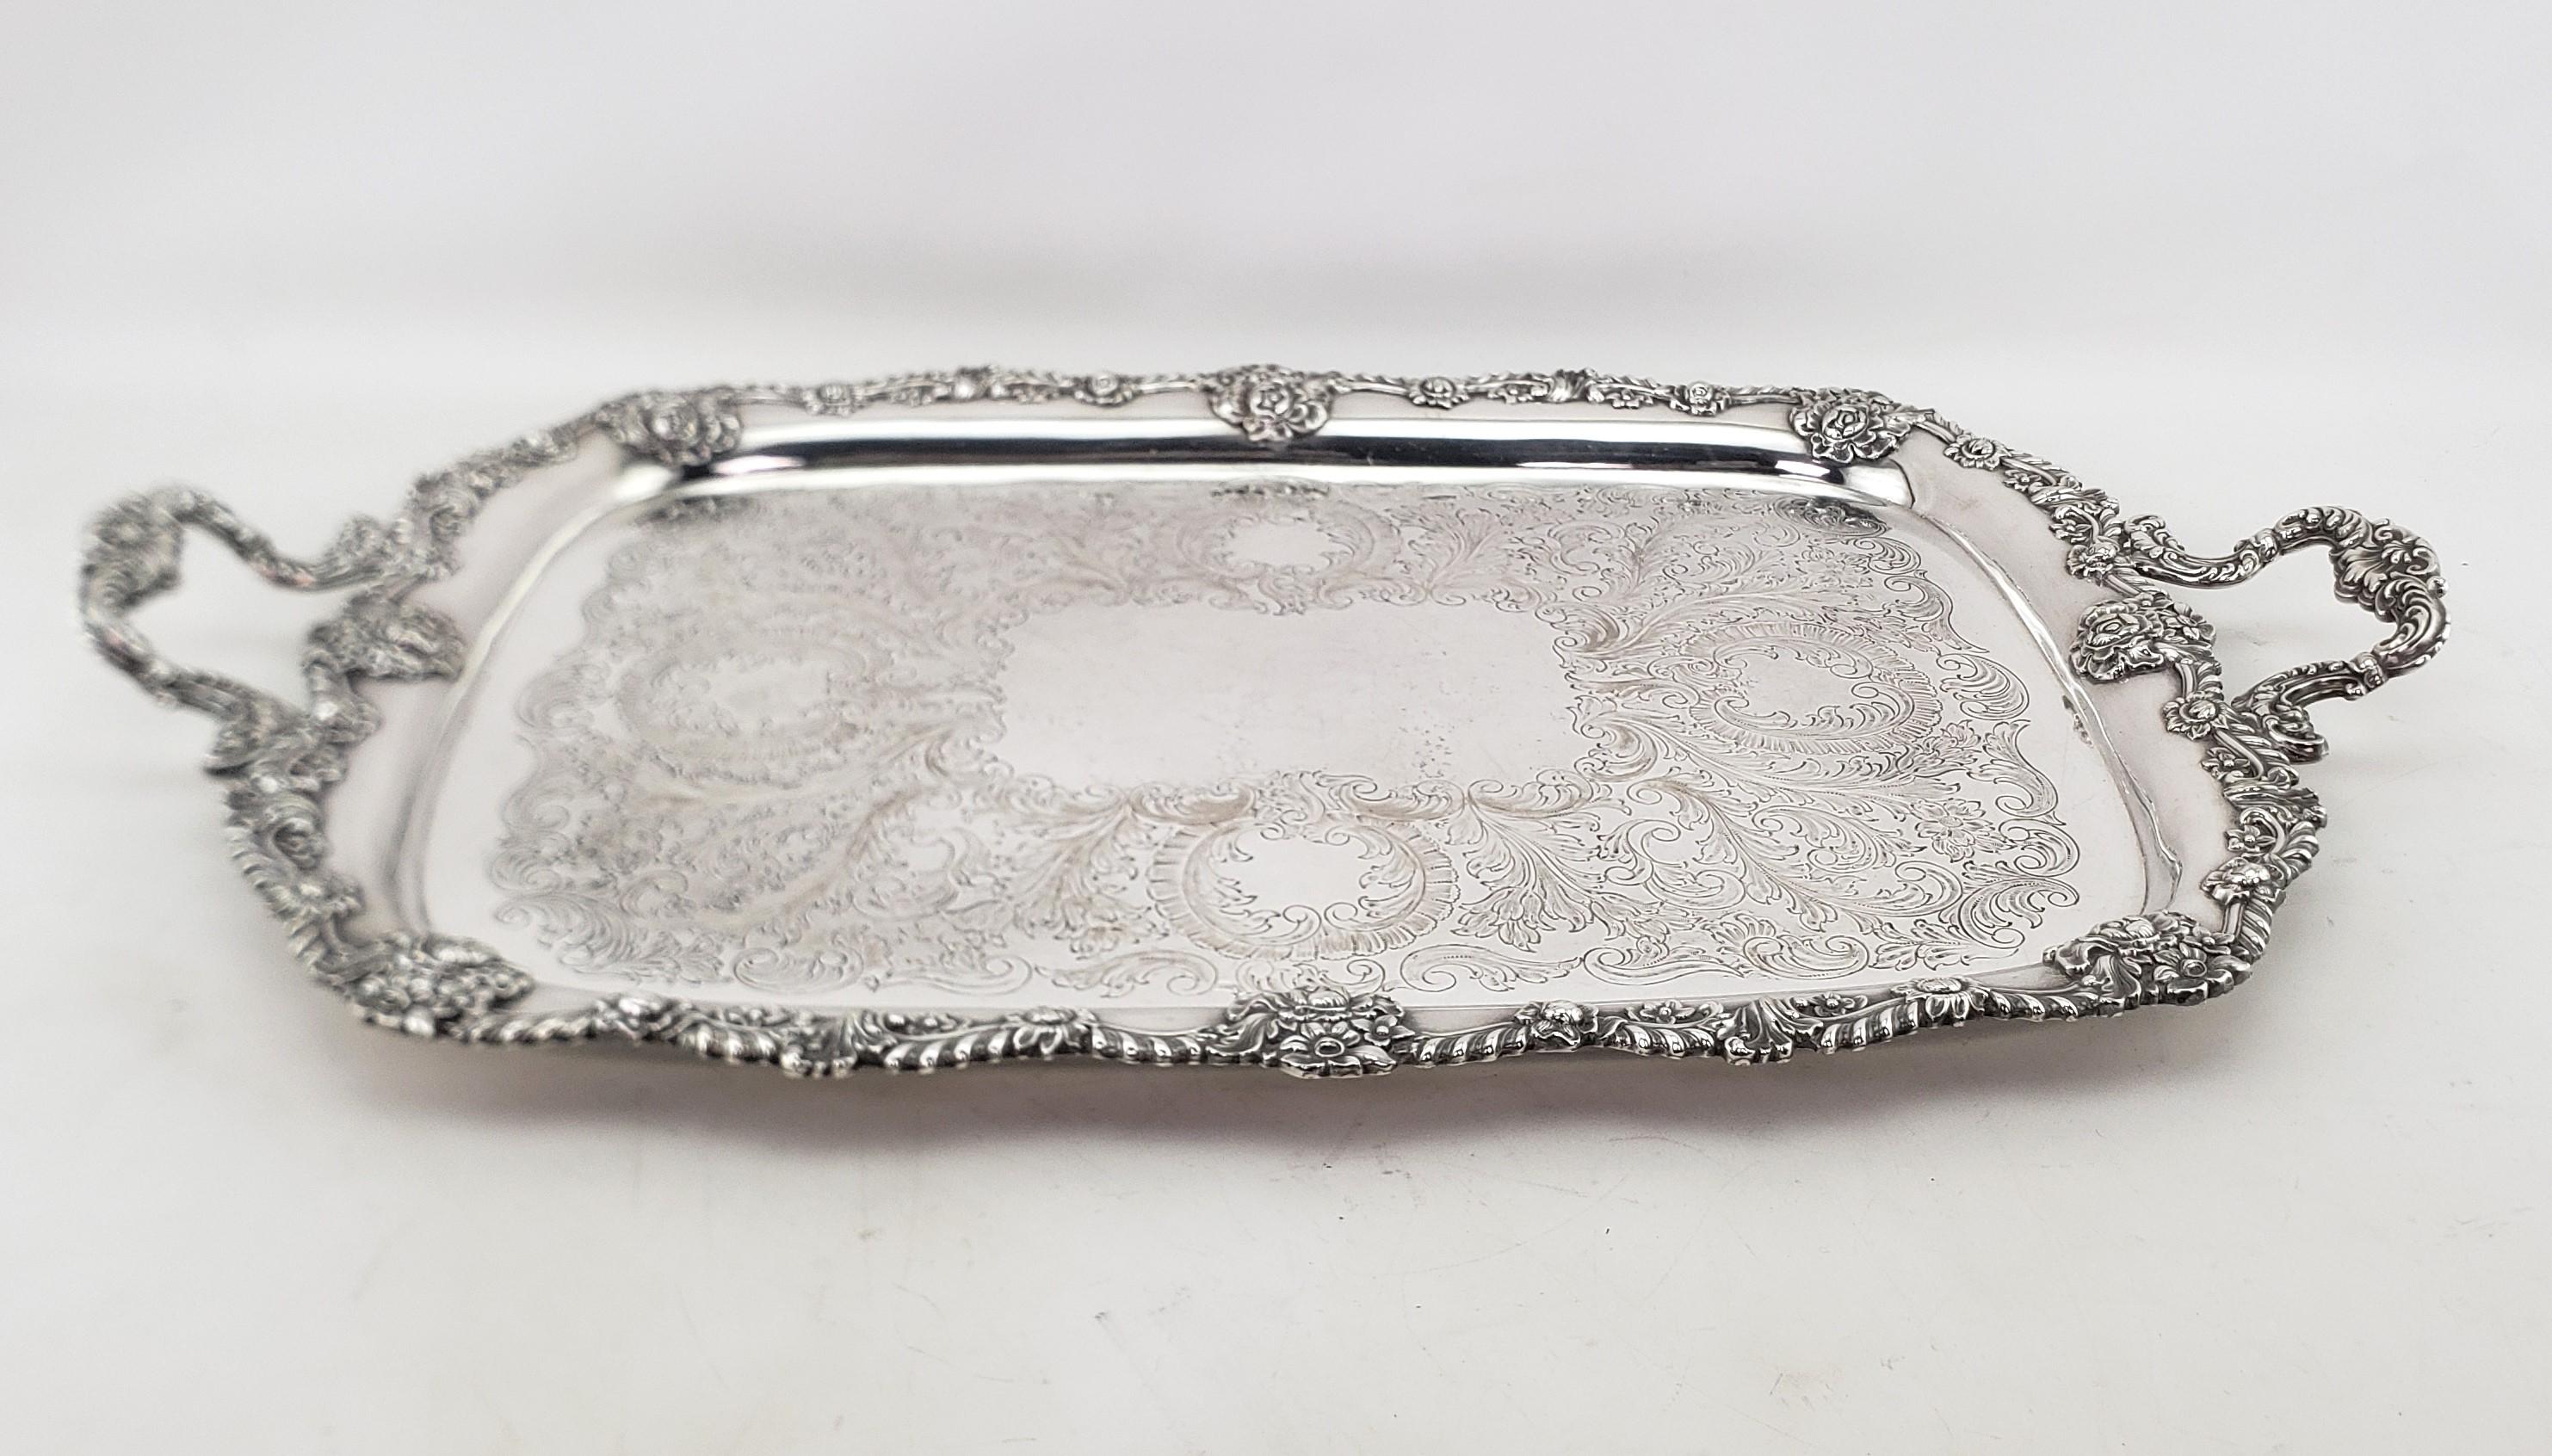 Machine-Made Large Antique English Silver Plated Serving Tray with Ornate Floral Decoration For Sale